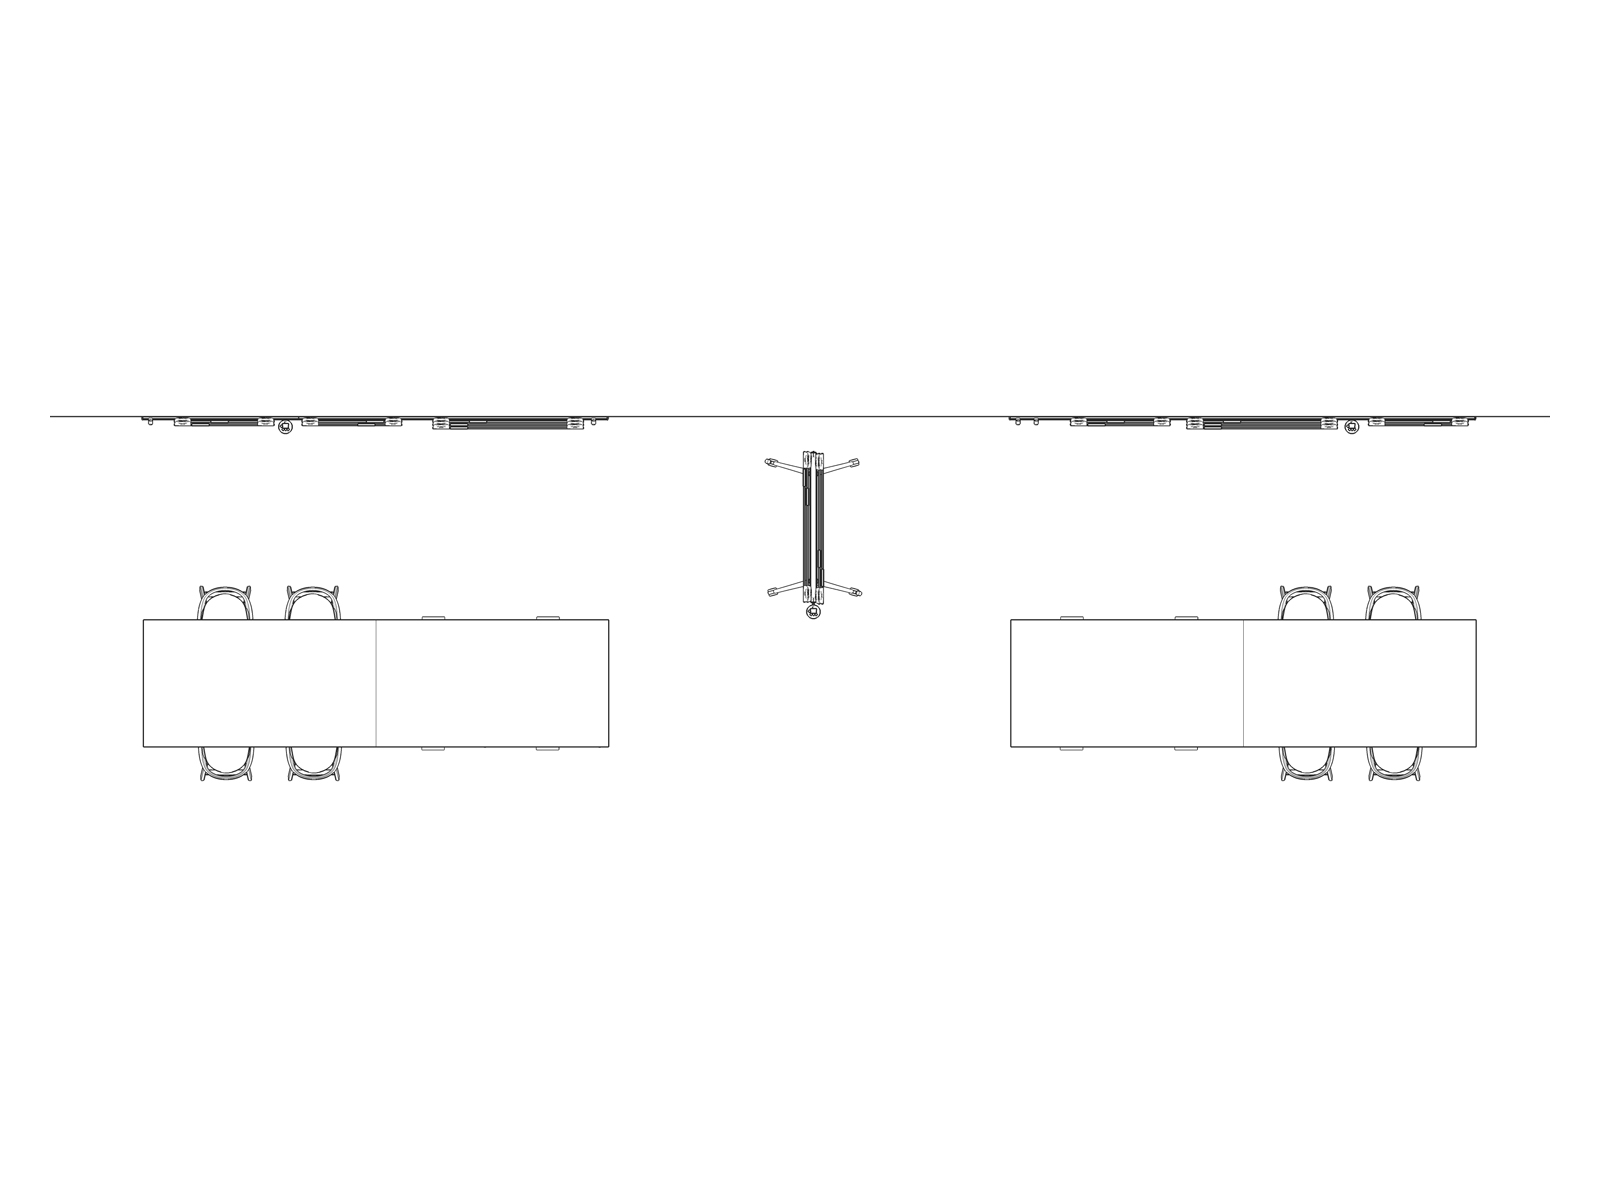 A line drawing viewed from above - Landing 006